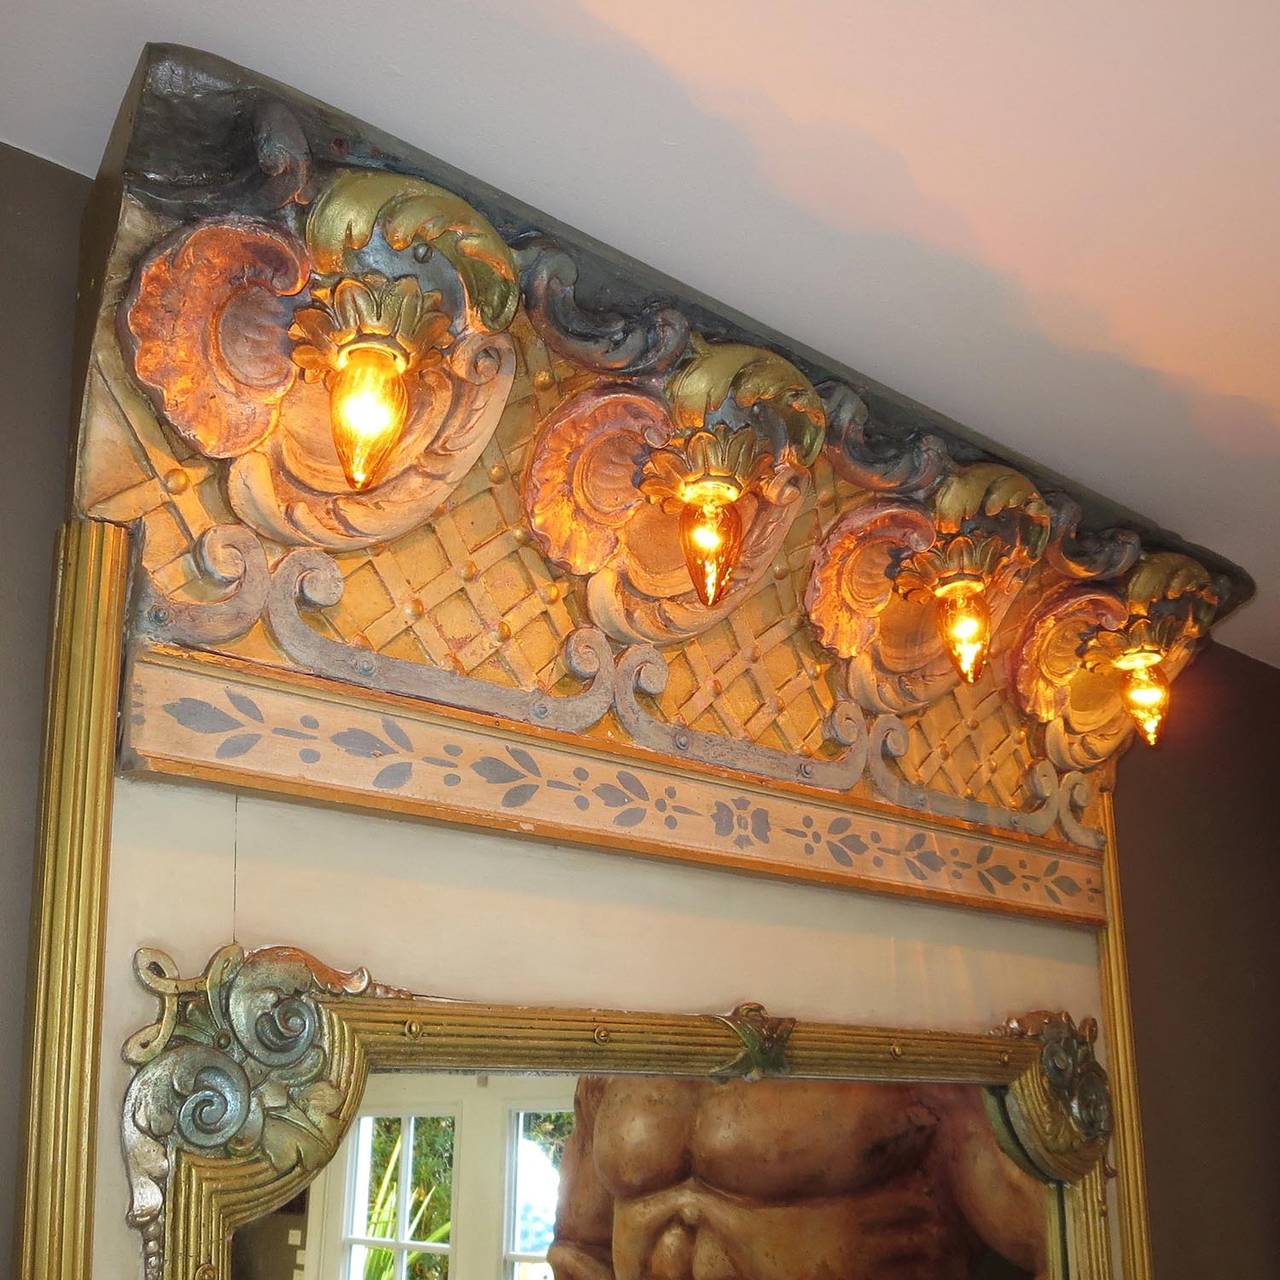 This fantastic lighted mirror was once part of the inner circle of a Dentzel carousel from Coney Island, New York. Dentzel was considered one of the very finest of the carousel makers in America, with the most beautiful and elaborately carved